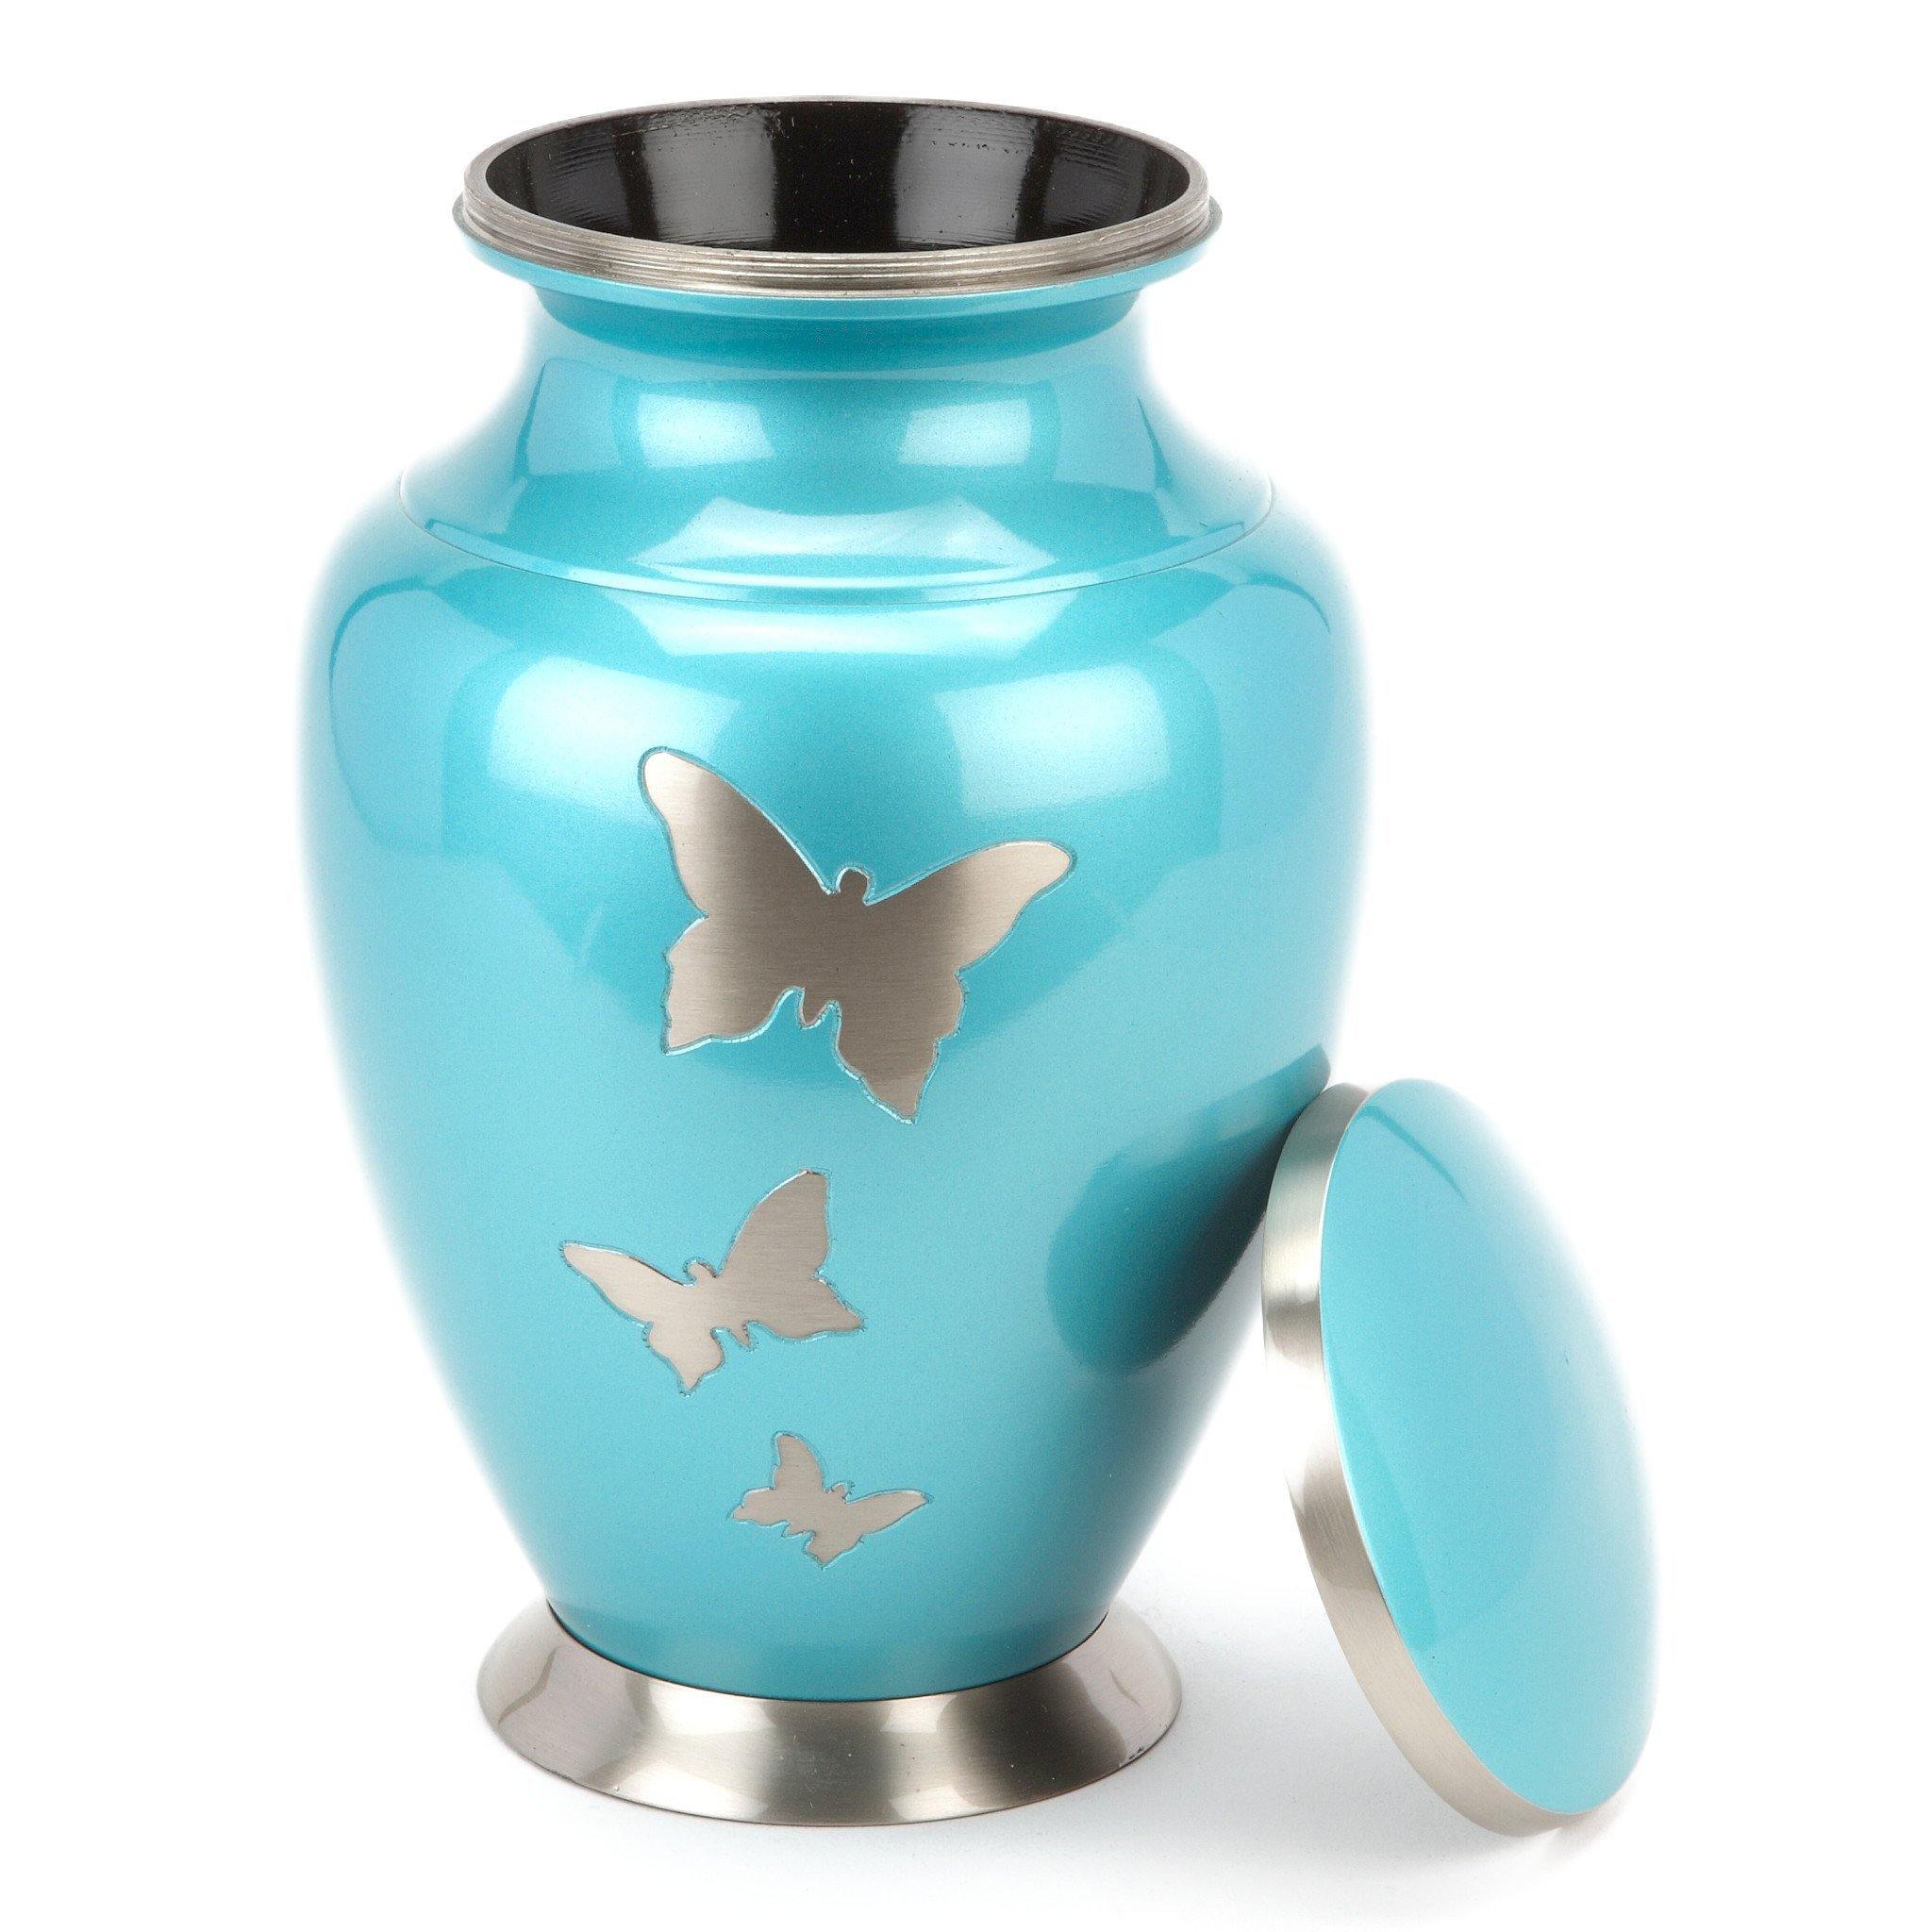 Taplow Teal Cremation Ashes Urn Adult RC